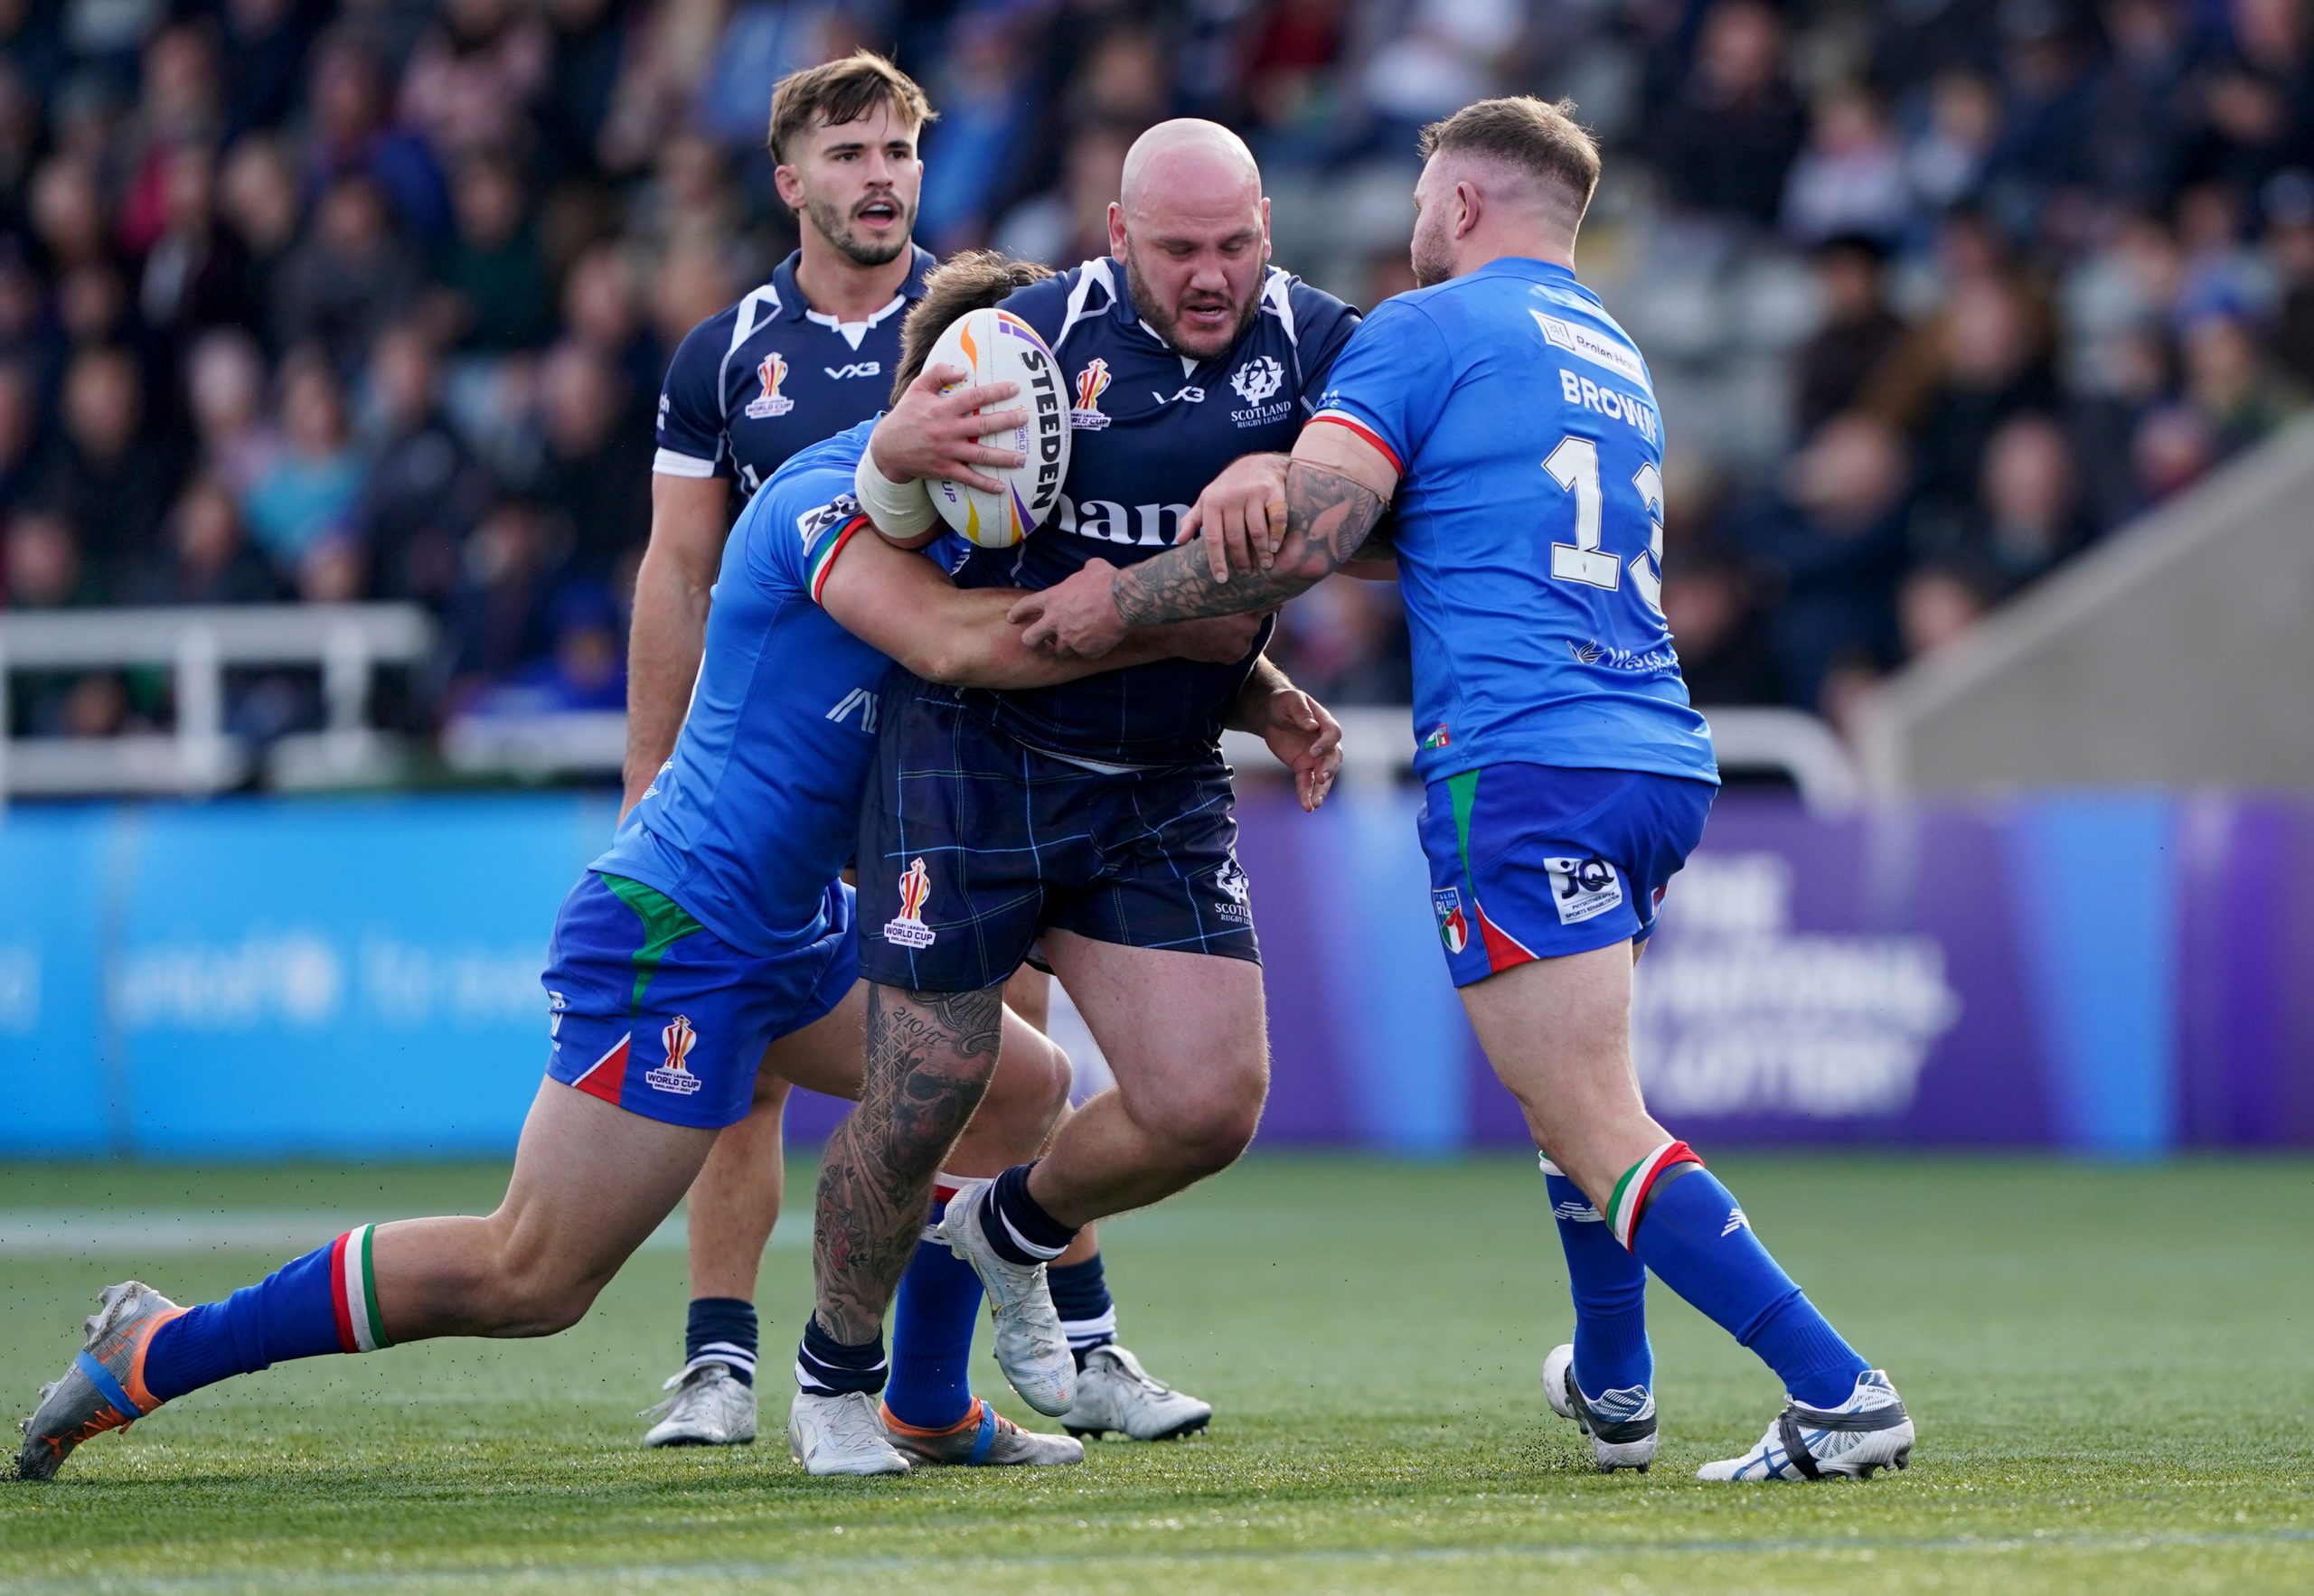 Scotland has potential for rugby league – Edinburgh Eagles’ Andrew McPhail